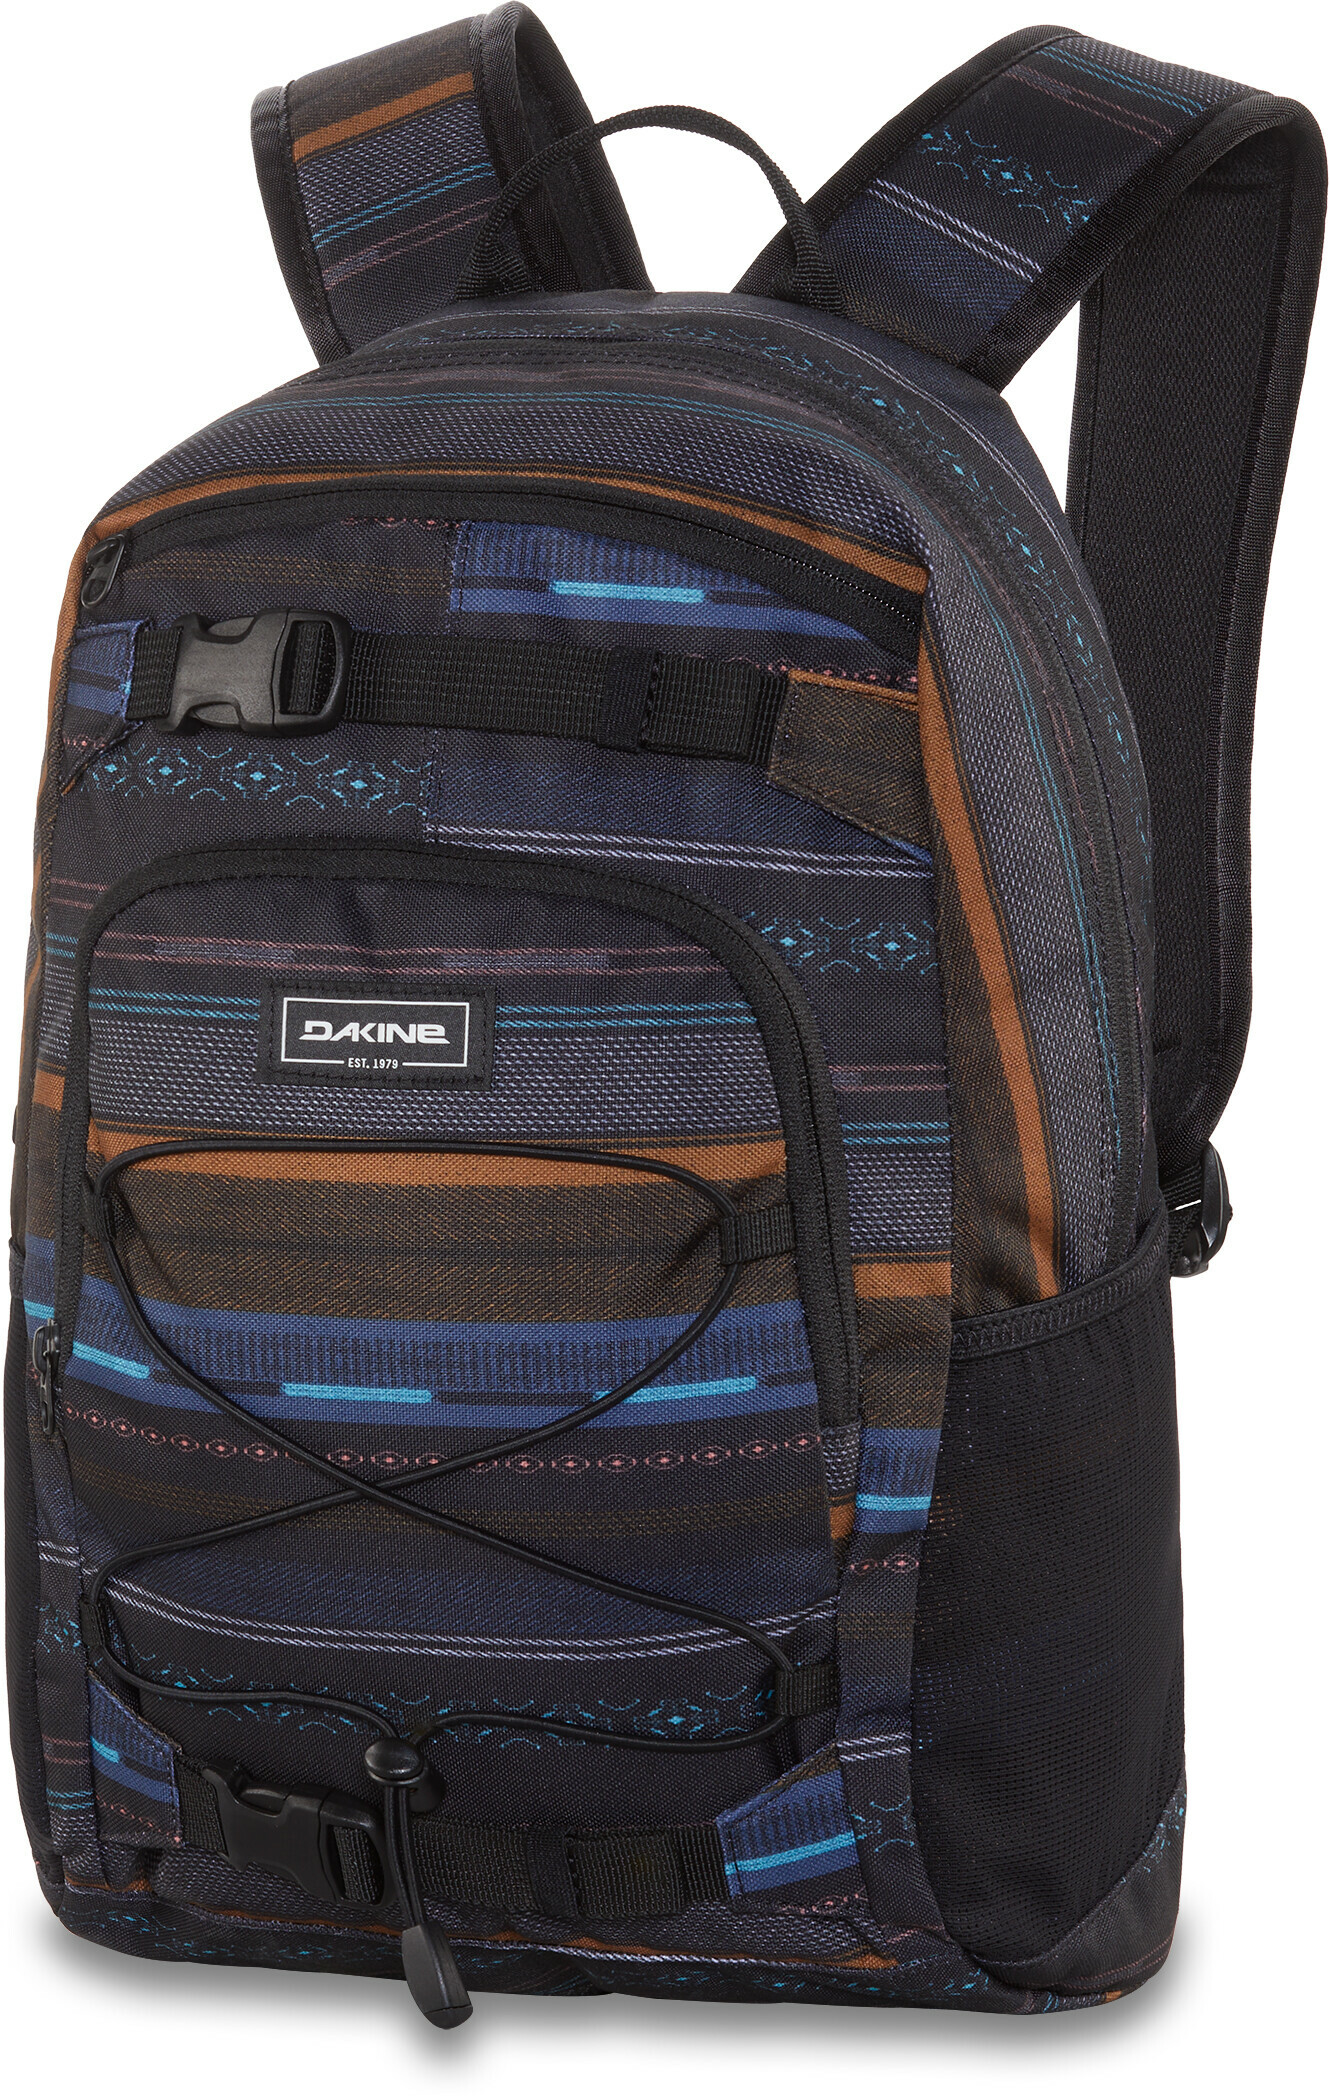 Grom 13L Backpack